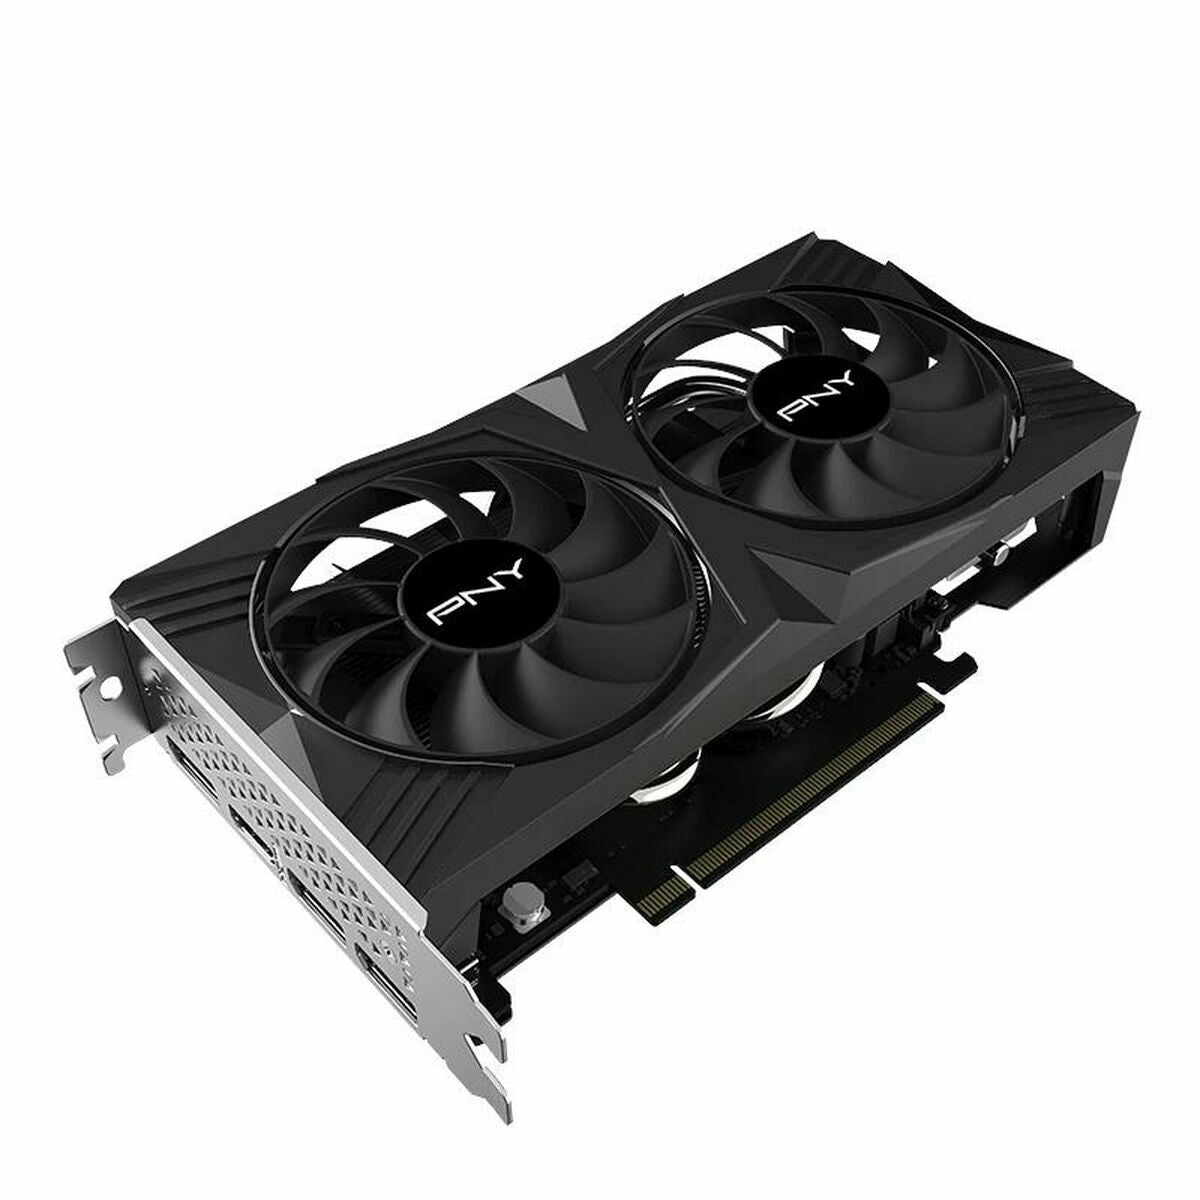 Graphics card PNY VCG40608DFXPB1 8 GB GDDR6 8 GB RAM NVIDIA Geforce RTX 4060 Ti, PNY, Computing, Components, graphics-card-pny-vcg40608dfxpb1-8-gb-gddr6-8-gb-ram-nvidia-geforce-rtx-4060-ti, Brand_PNY, category-reference-2609, category-reference-2803, category-reference-2812, category-reference-t-19685, category-reference-t-19912, category-reference-t-21360, computers / components, Condition_NEW, Price_300 - 400, Teleworking, RiotNook